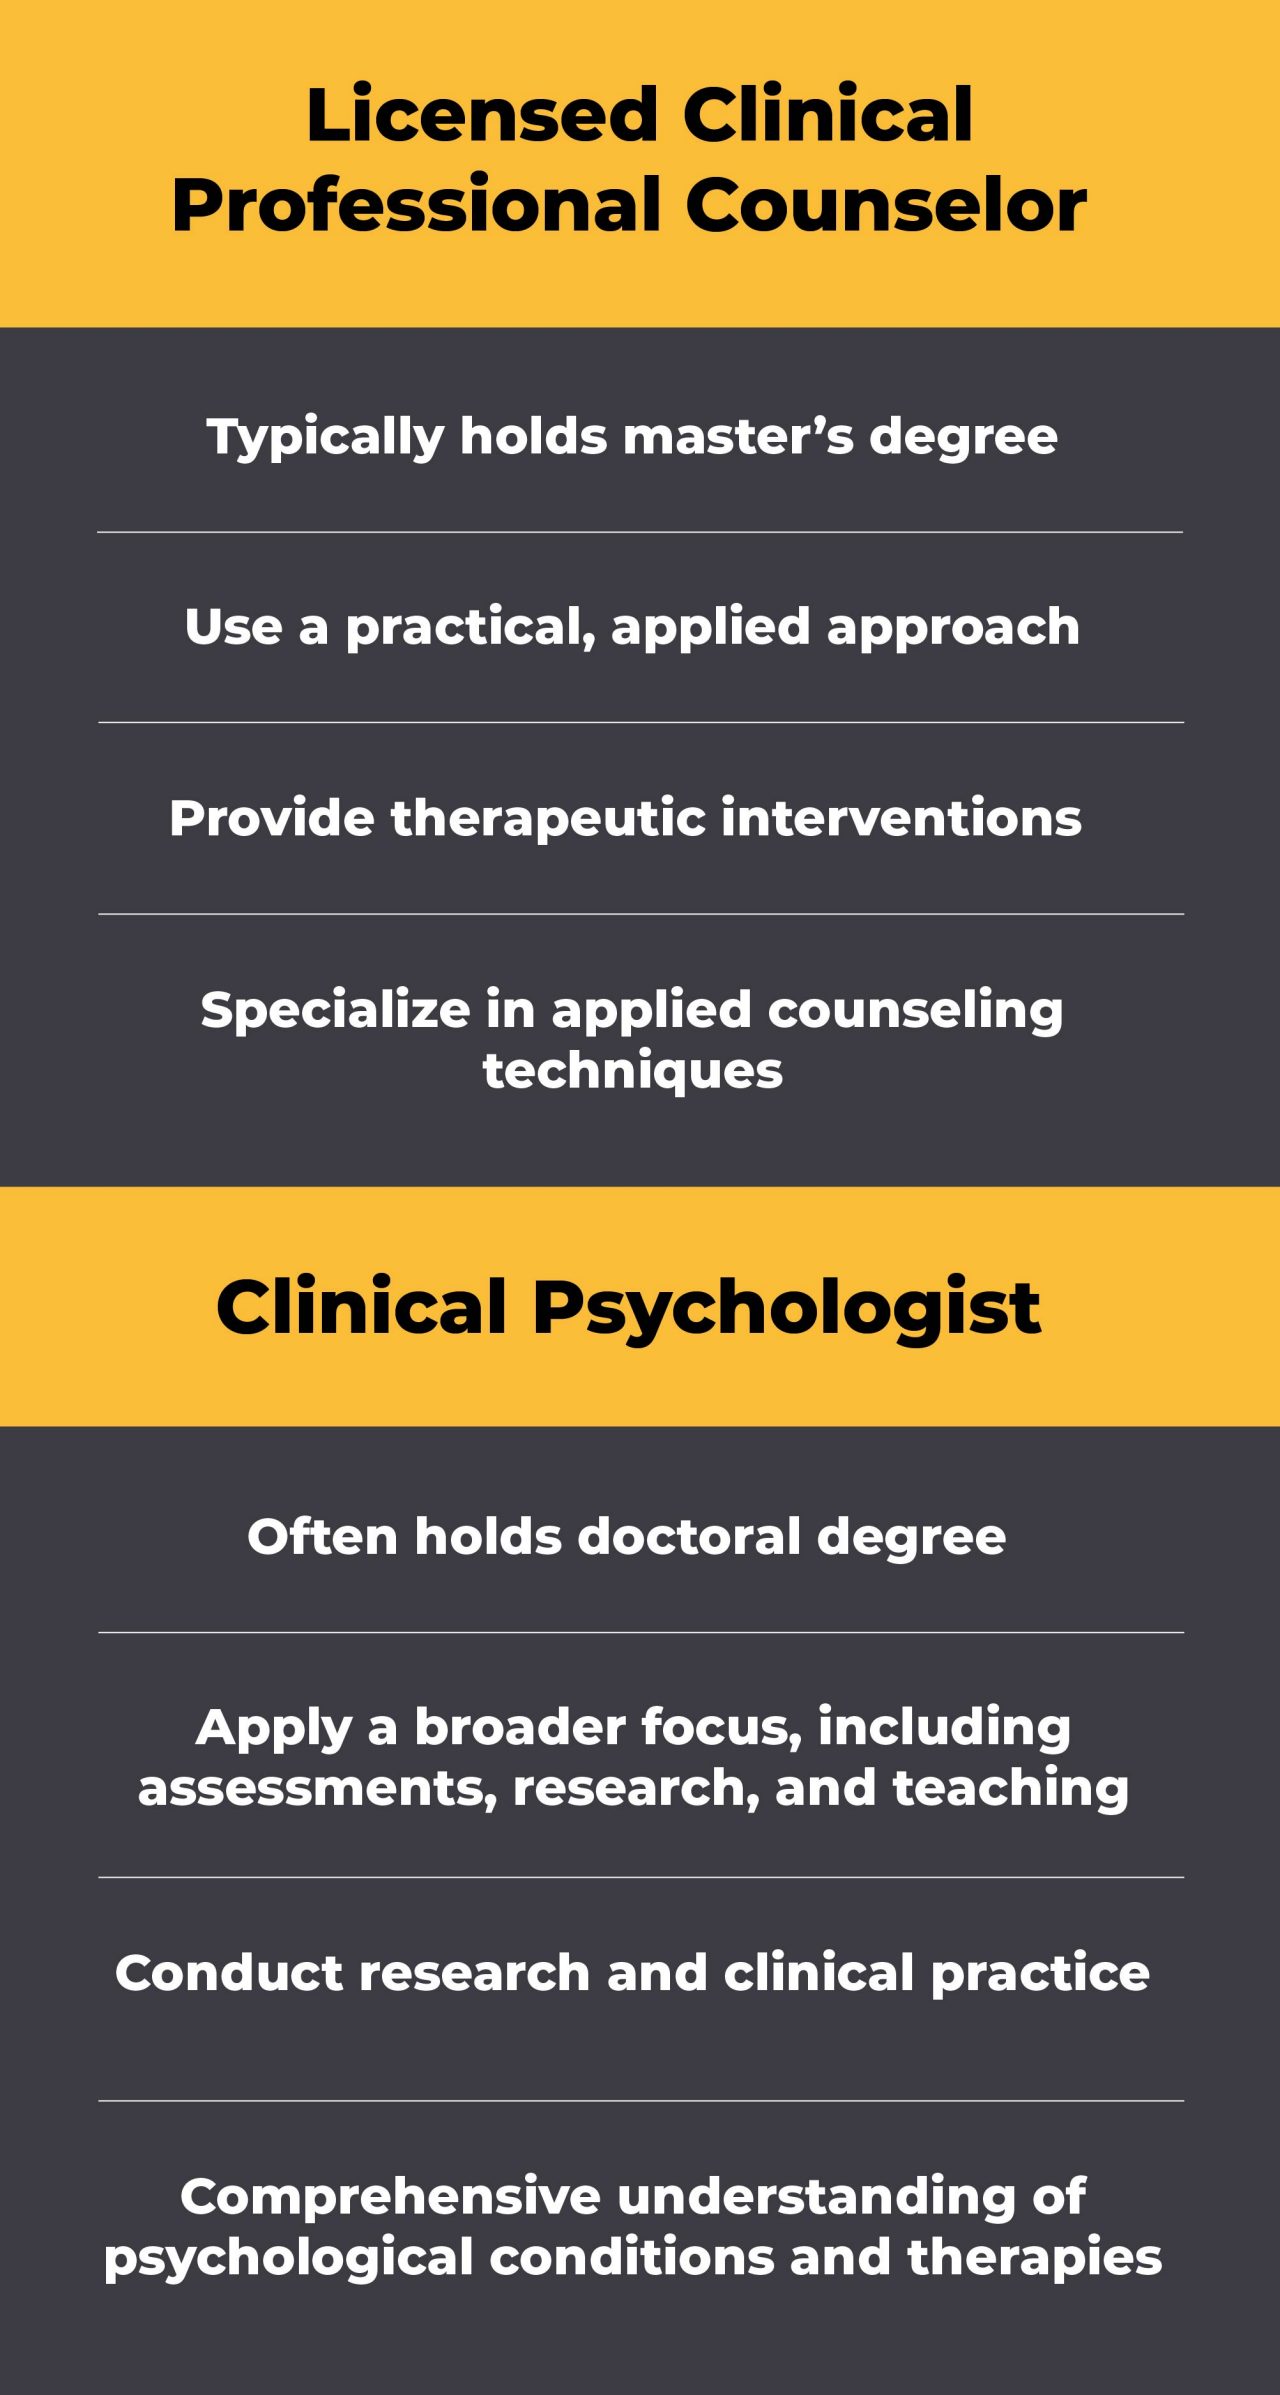 Text that reads, "Licensed Clinical Professional Counselor: Typically holds master's degree; Use a practical, applied approach; Provide therapeutic interventions; Specialize in applied counseling techniques; Clinical Psychologist: Often holds doctoral degree; Apply a broader focus, including assessments, research, and teaching; Conduct research and clinical practice; Comprehensive understanding of psychological conditions and therapies."